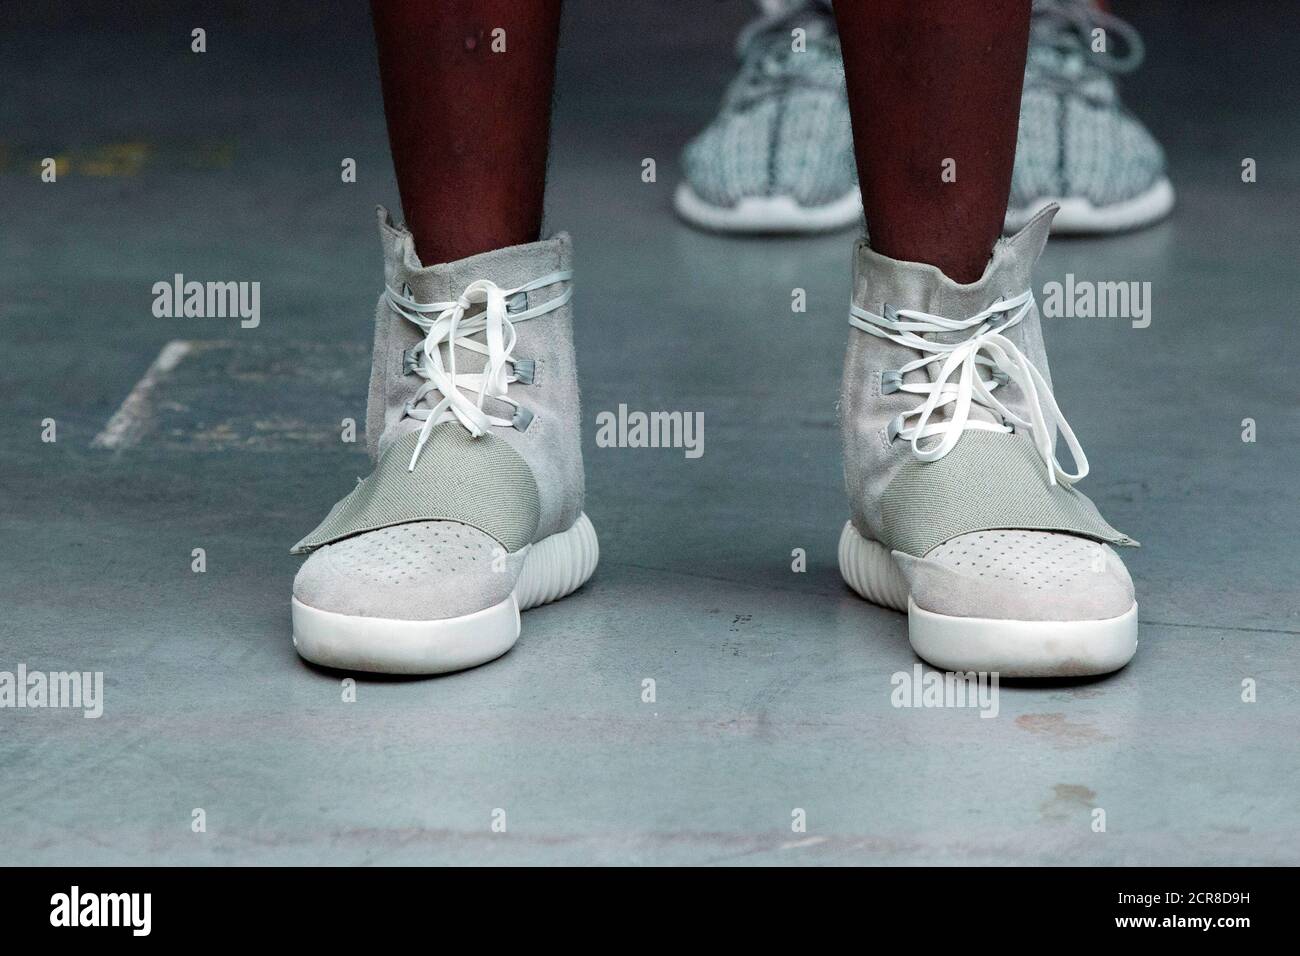 A model wears a pair of Adidas Yeezy 750 Boost shoes designed by Kanye West  as part of his Fall/Winter 2015 partnership line with Adidas at New York  Fashion Week, U.S. February